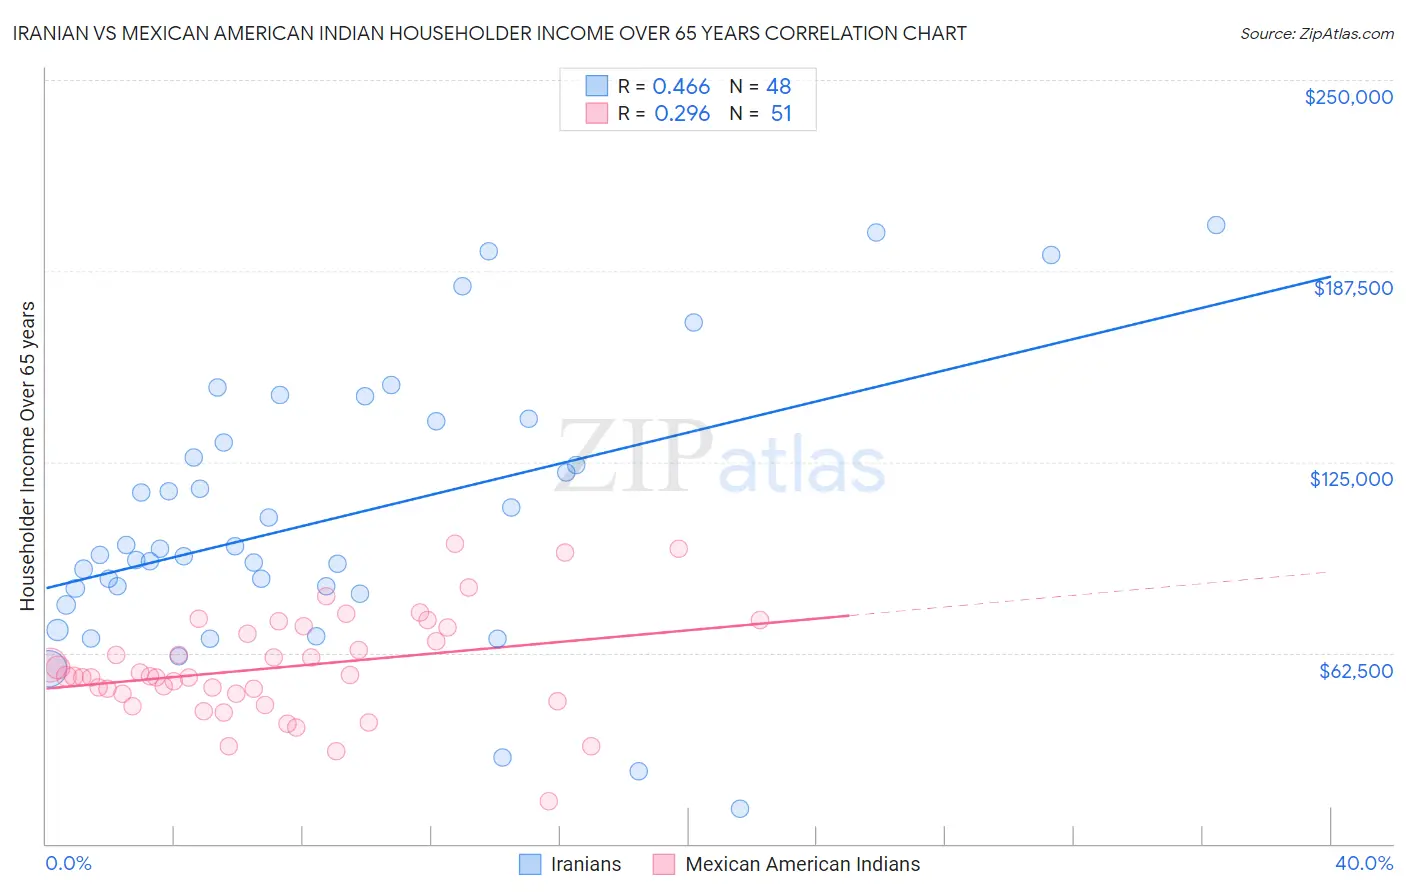 Iranian vs Mexican American Indian Householder Income Over 65 years